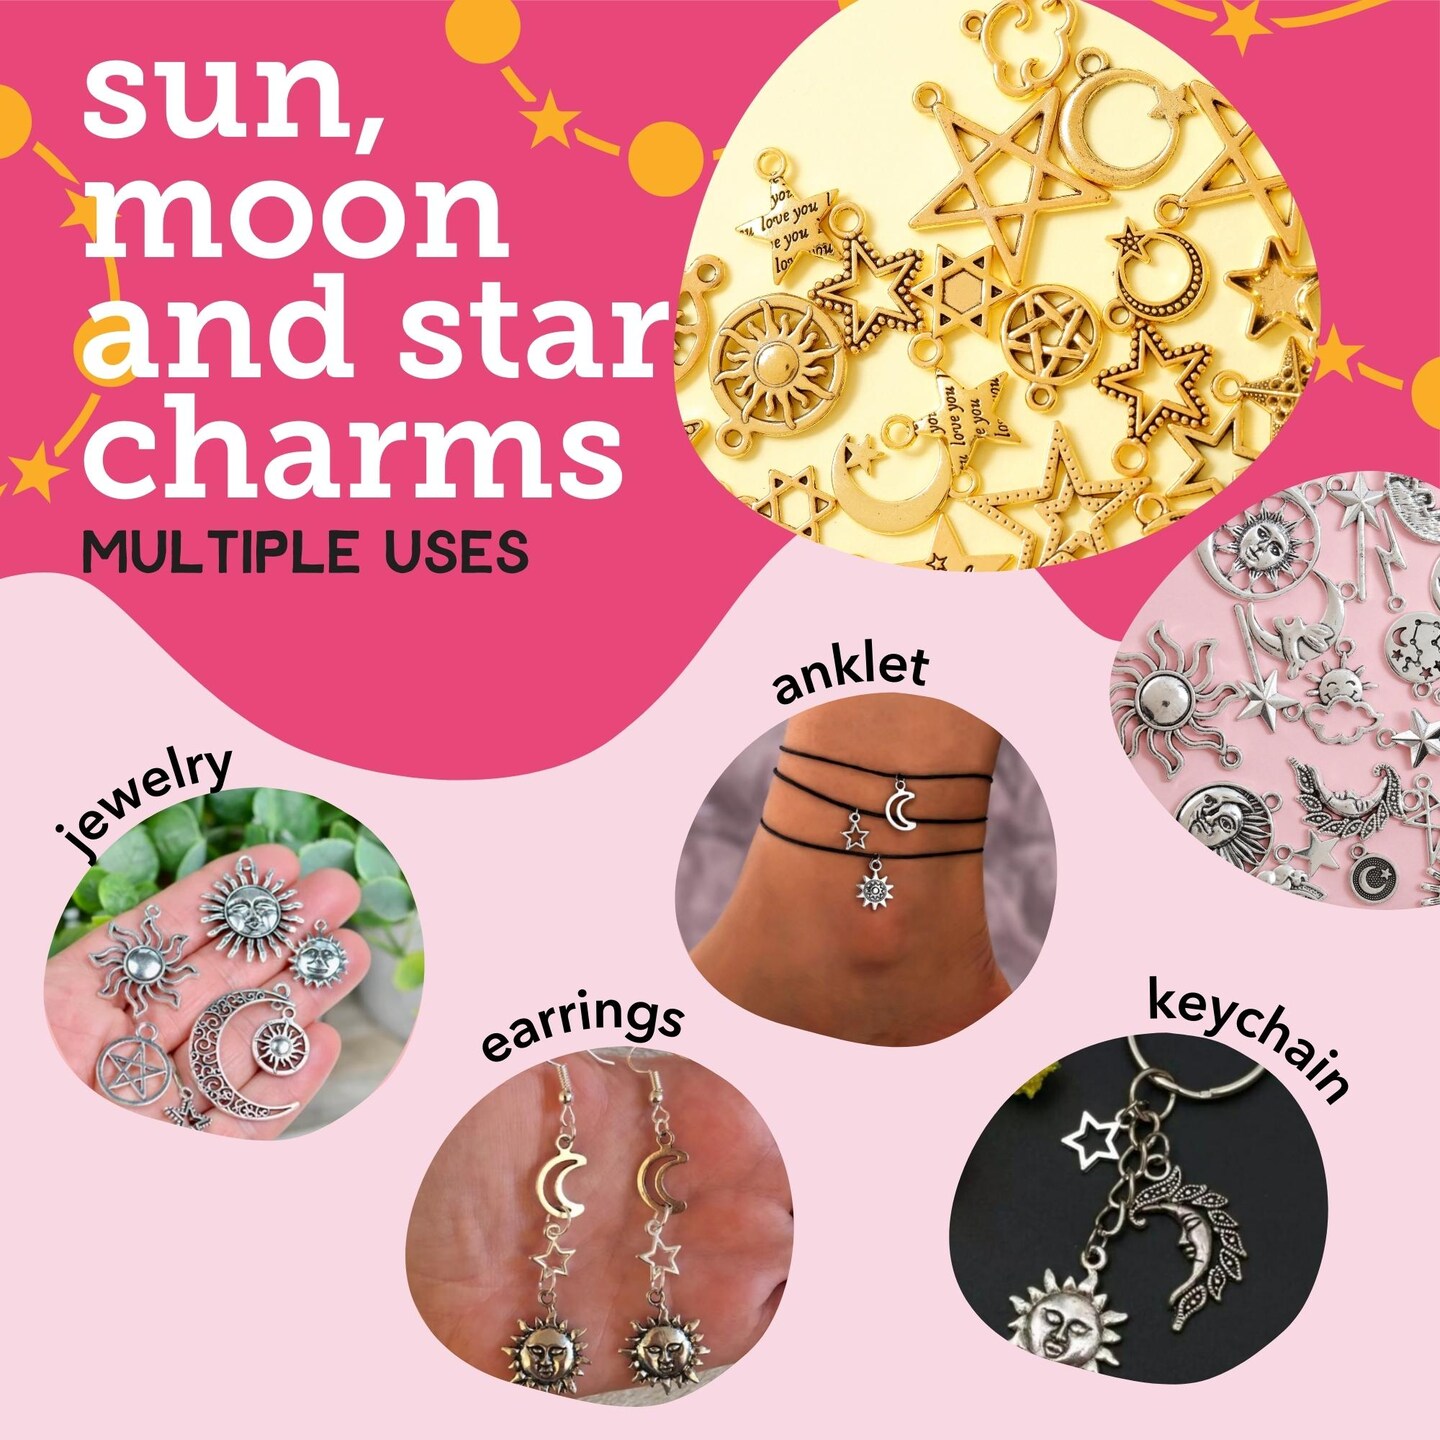 Celestial Mixed Sun Moon Star Charms, JIALEEY Wholesale Bulk Lots Antique Alloy Charms Pendants DIY for Necklace Bracelet Jewelry Making and Crafting